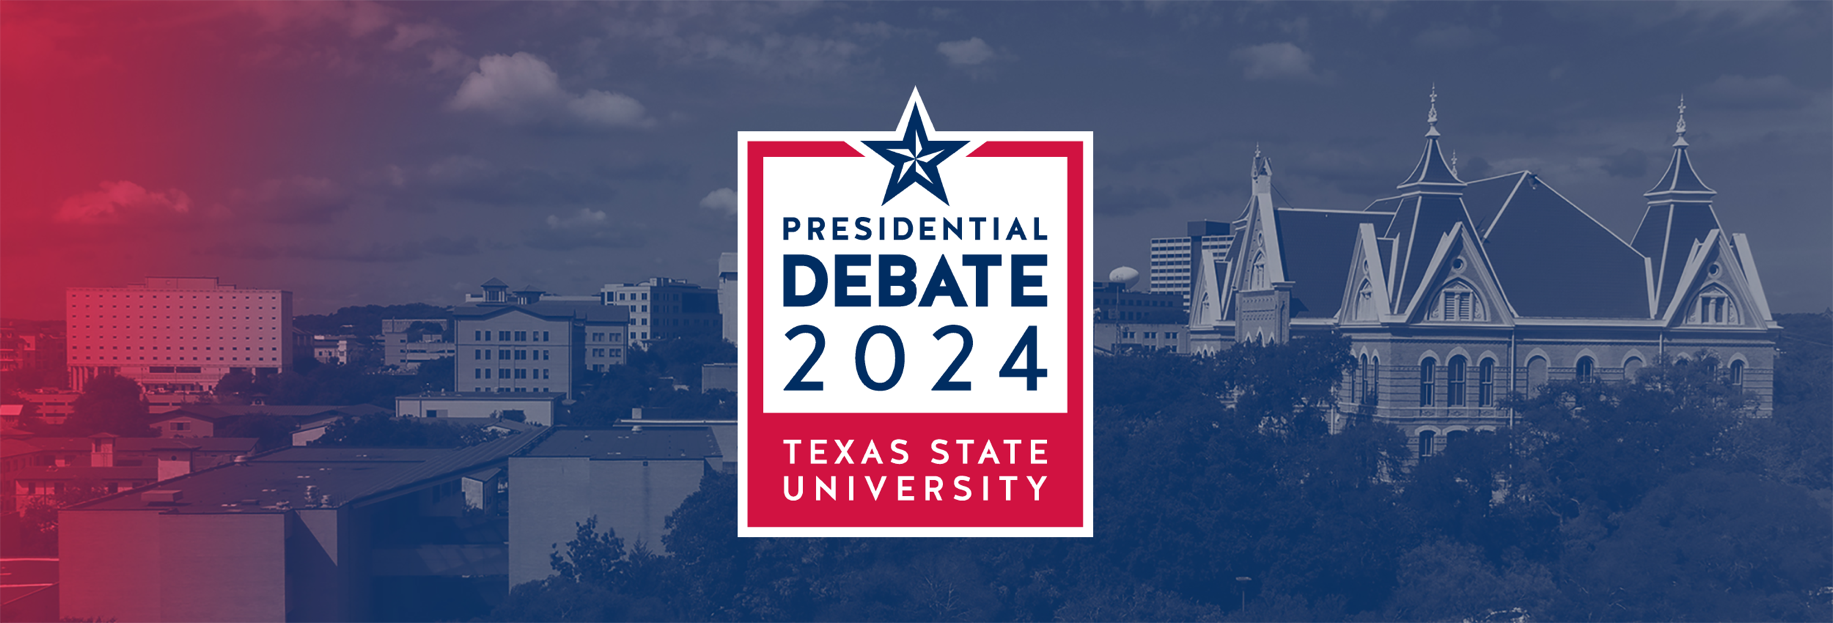 presidential debate logo overlayed on an arial photo of campus